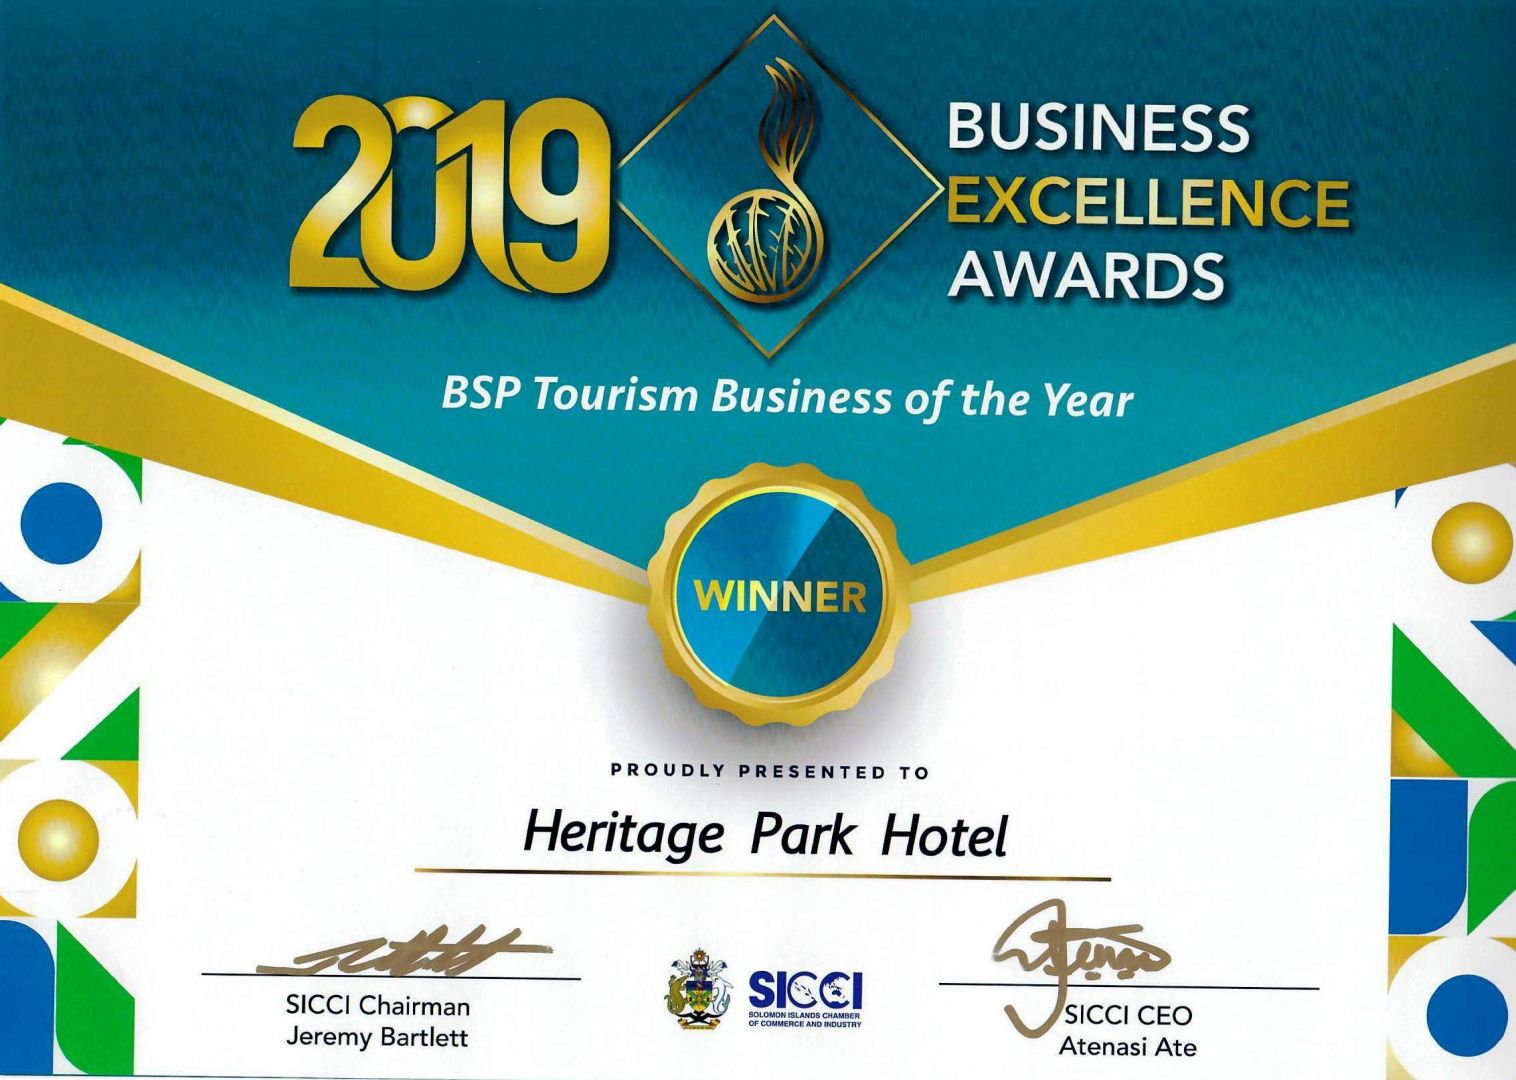 Business Excellence Awards 2019